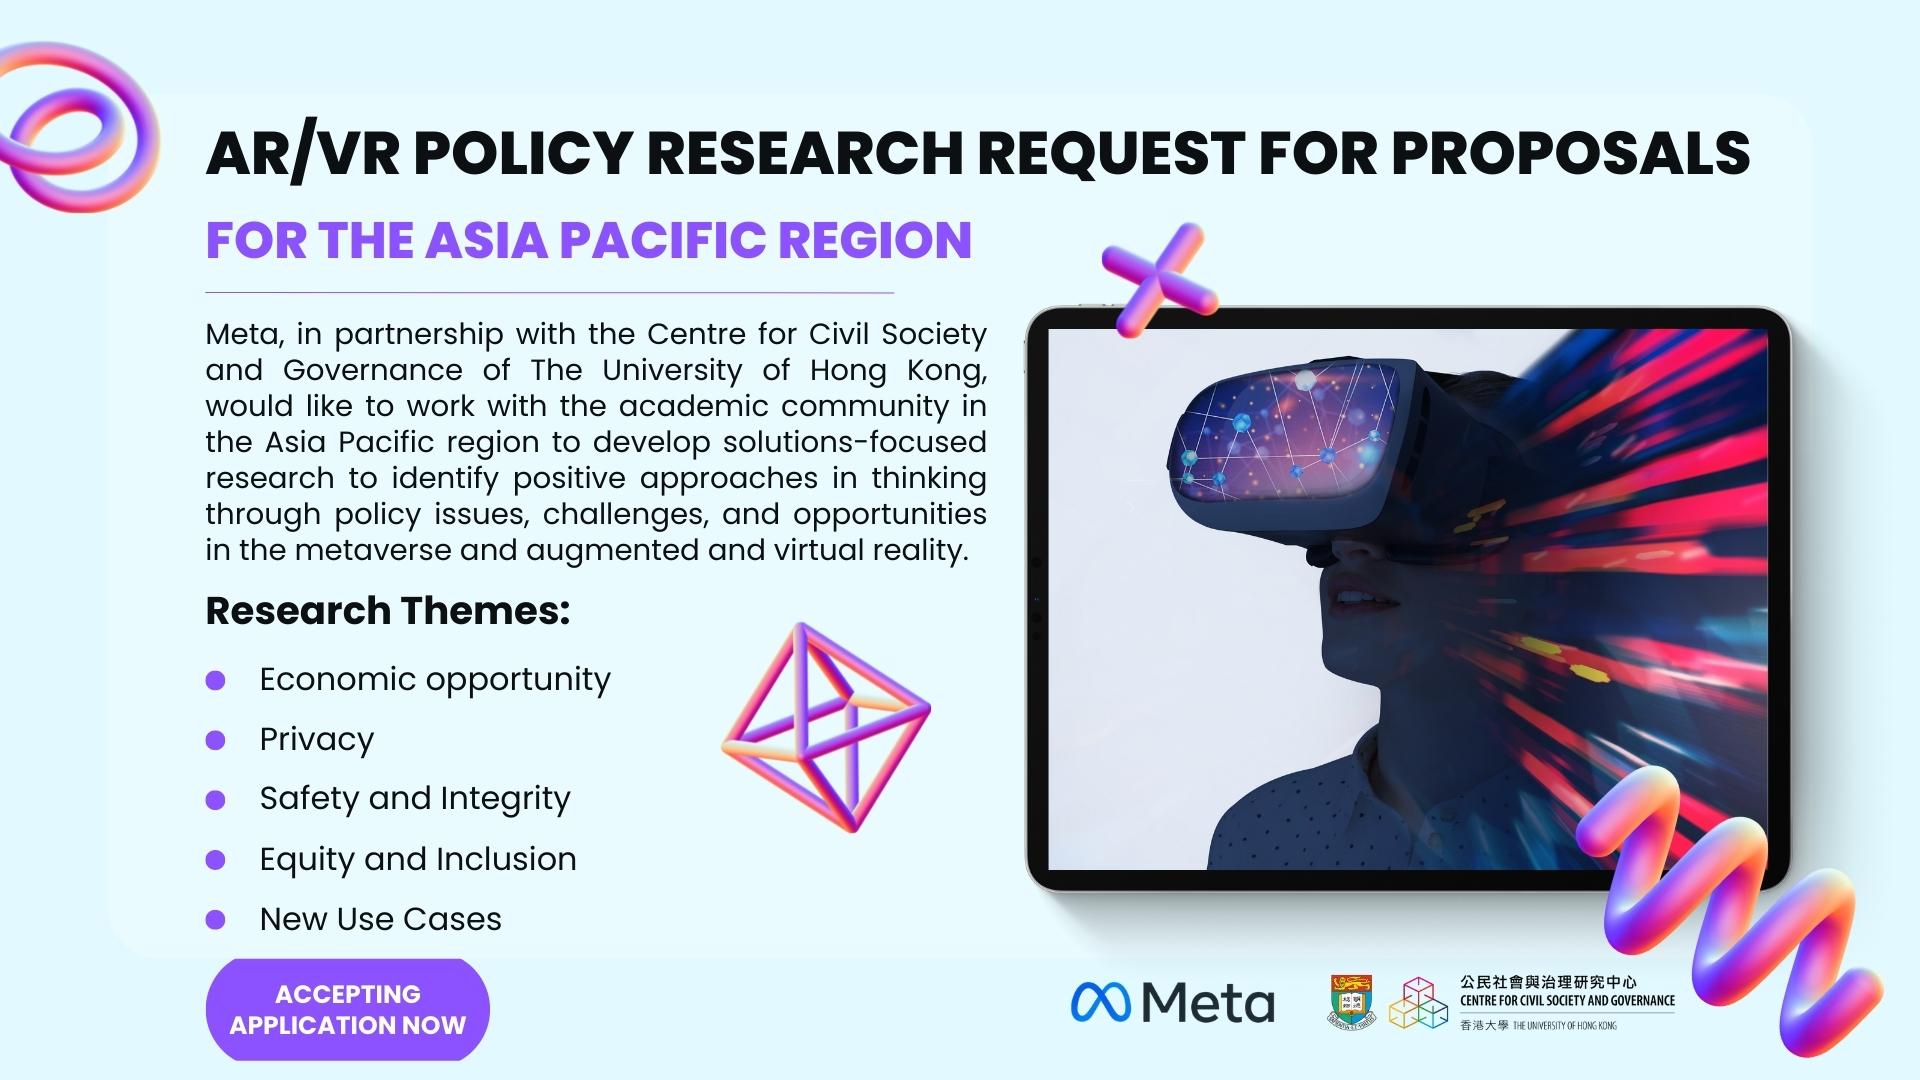 HKU & Meta Announce Request for Proposals for  AR/VR Policy Research in the Asia Pacific Region